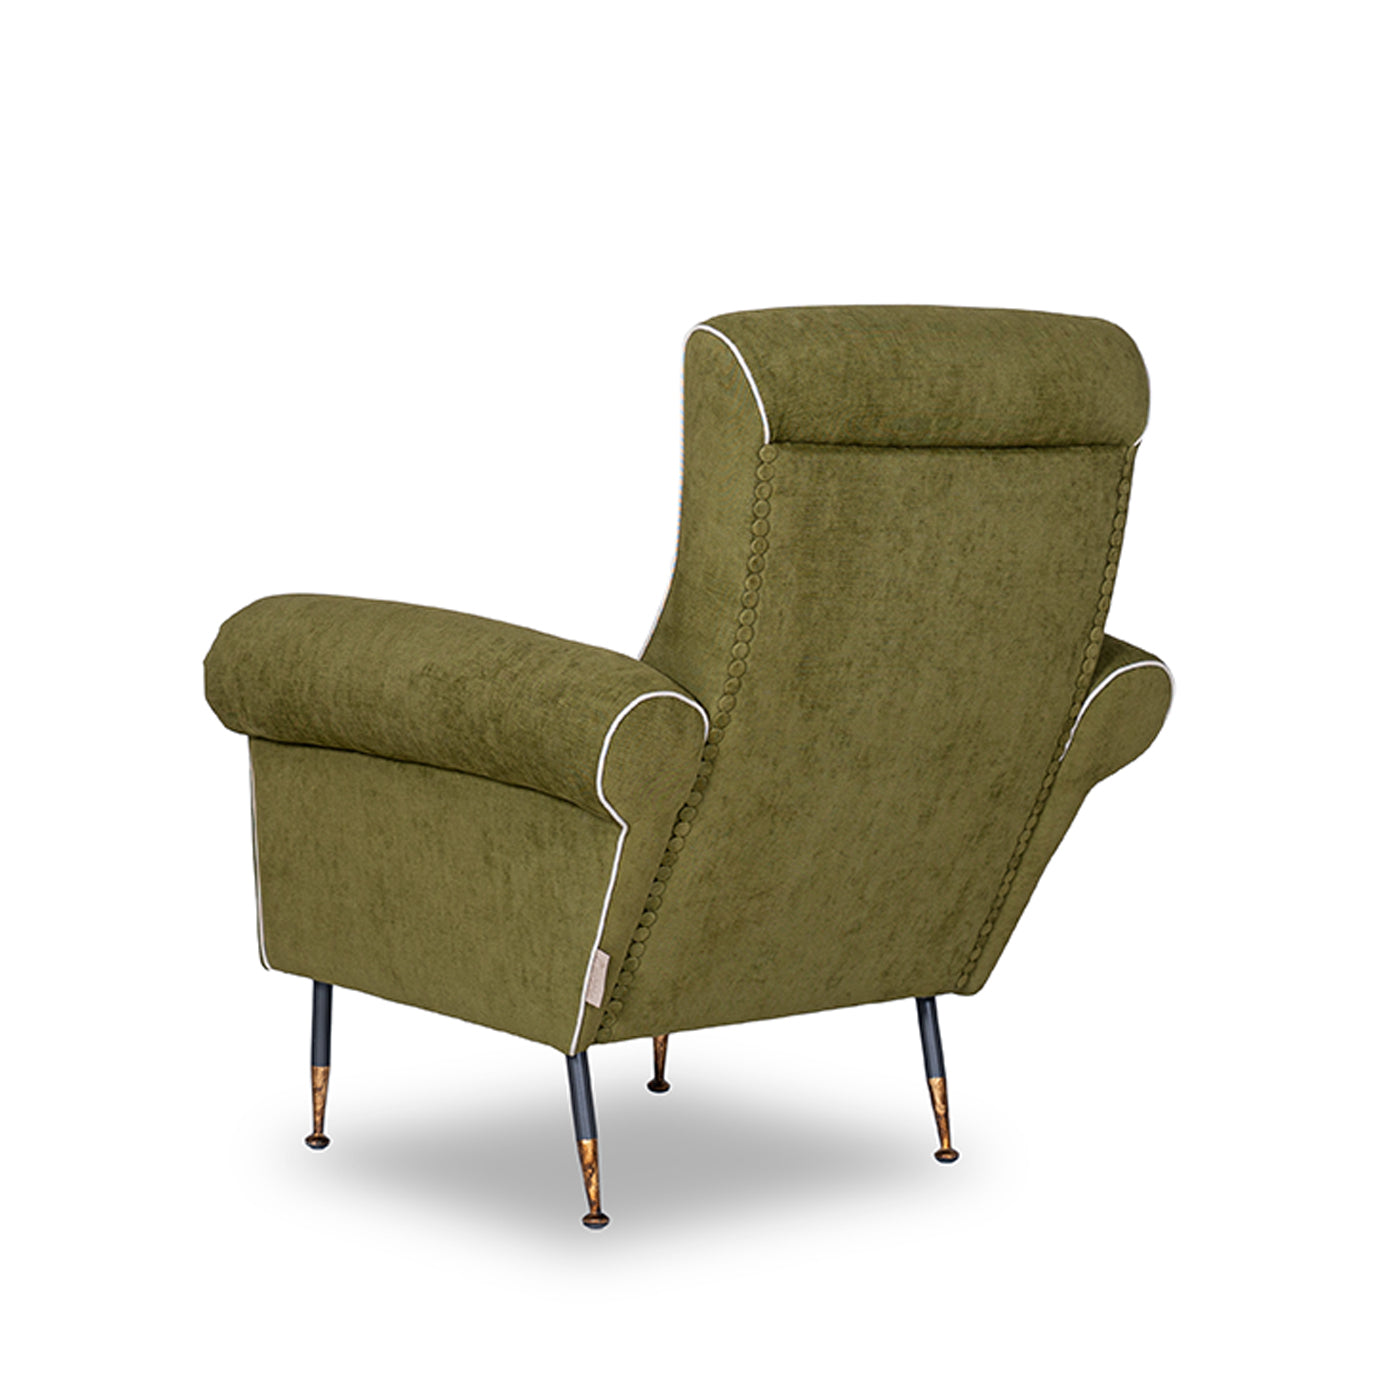 Pulce Armchair Tribeca Collection - Alternative view 4